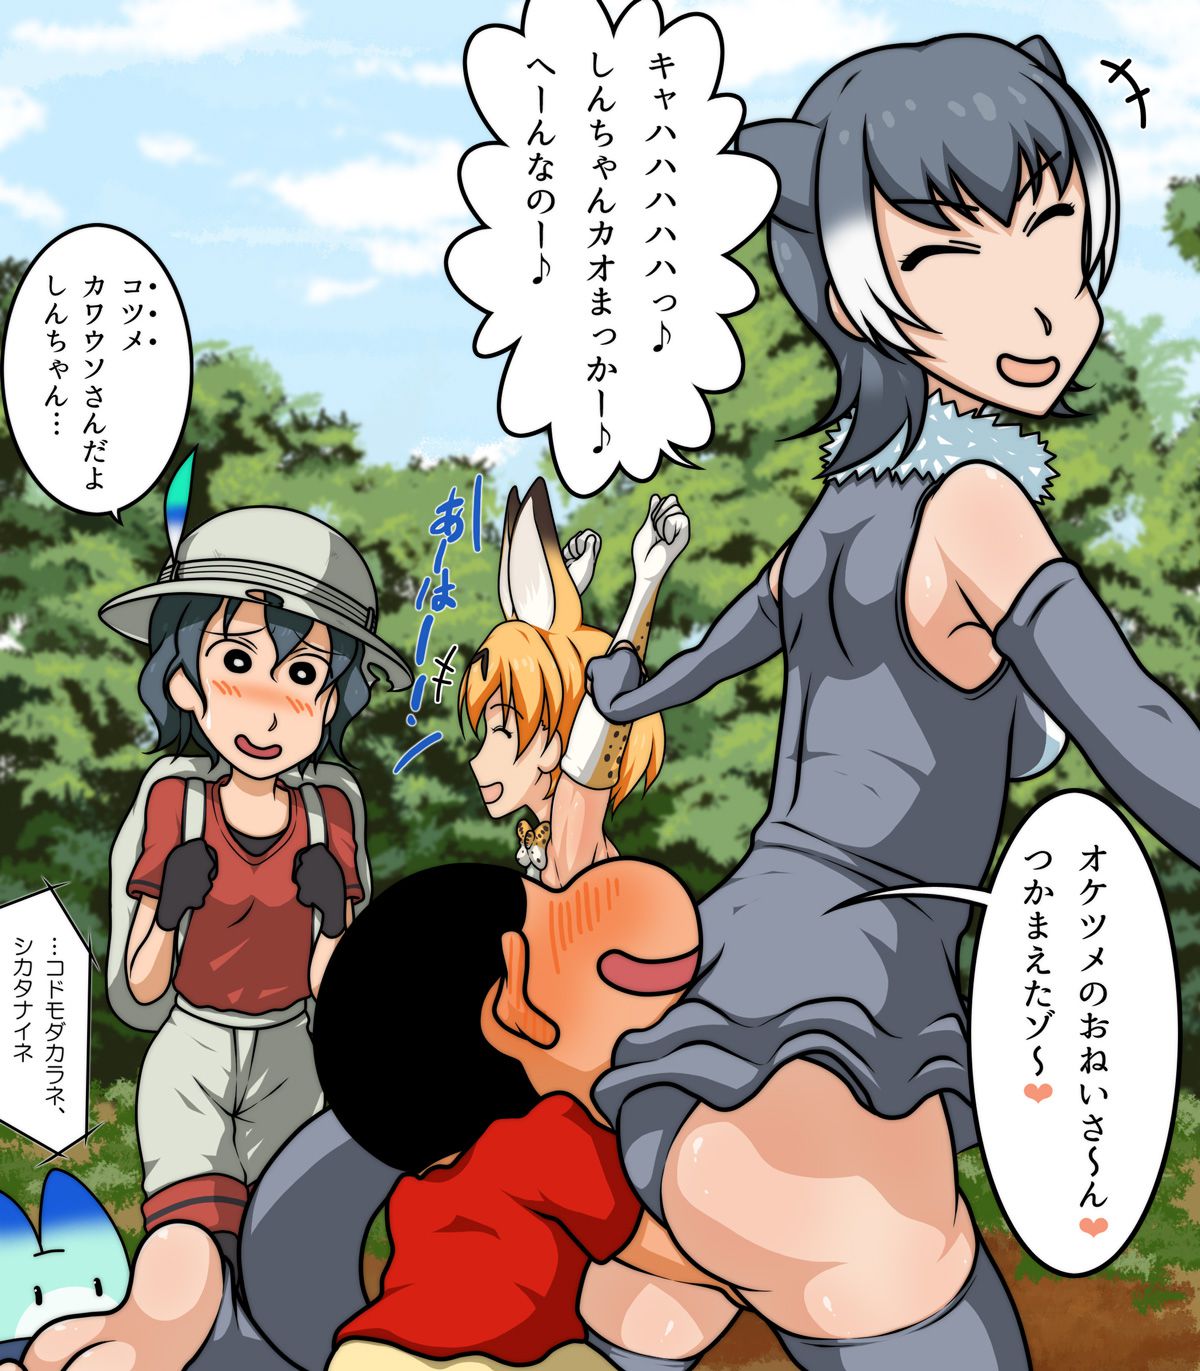 【Secondary】Erotic image summary of "Crayon Shin-chan character" counted in japan's four major national anime 58